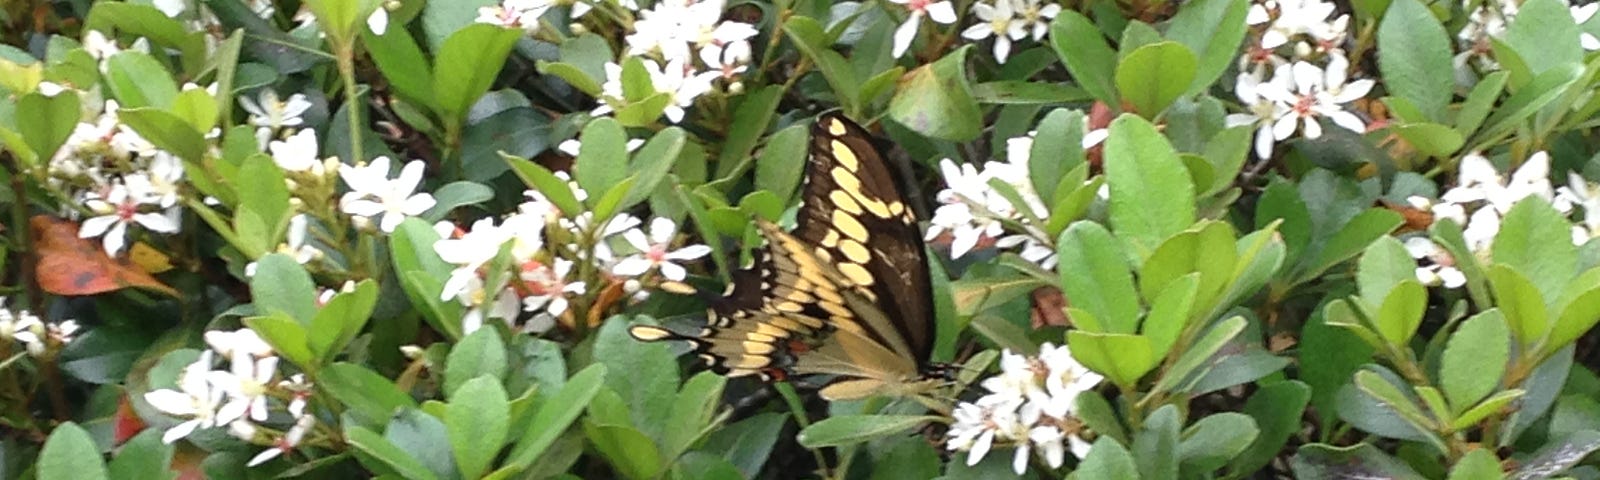 A monarch butterfly on a green plant with tiny white flowers